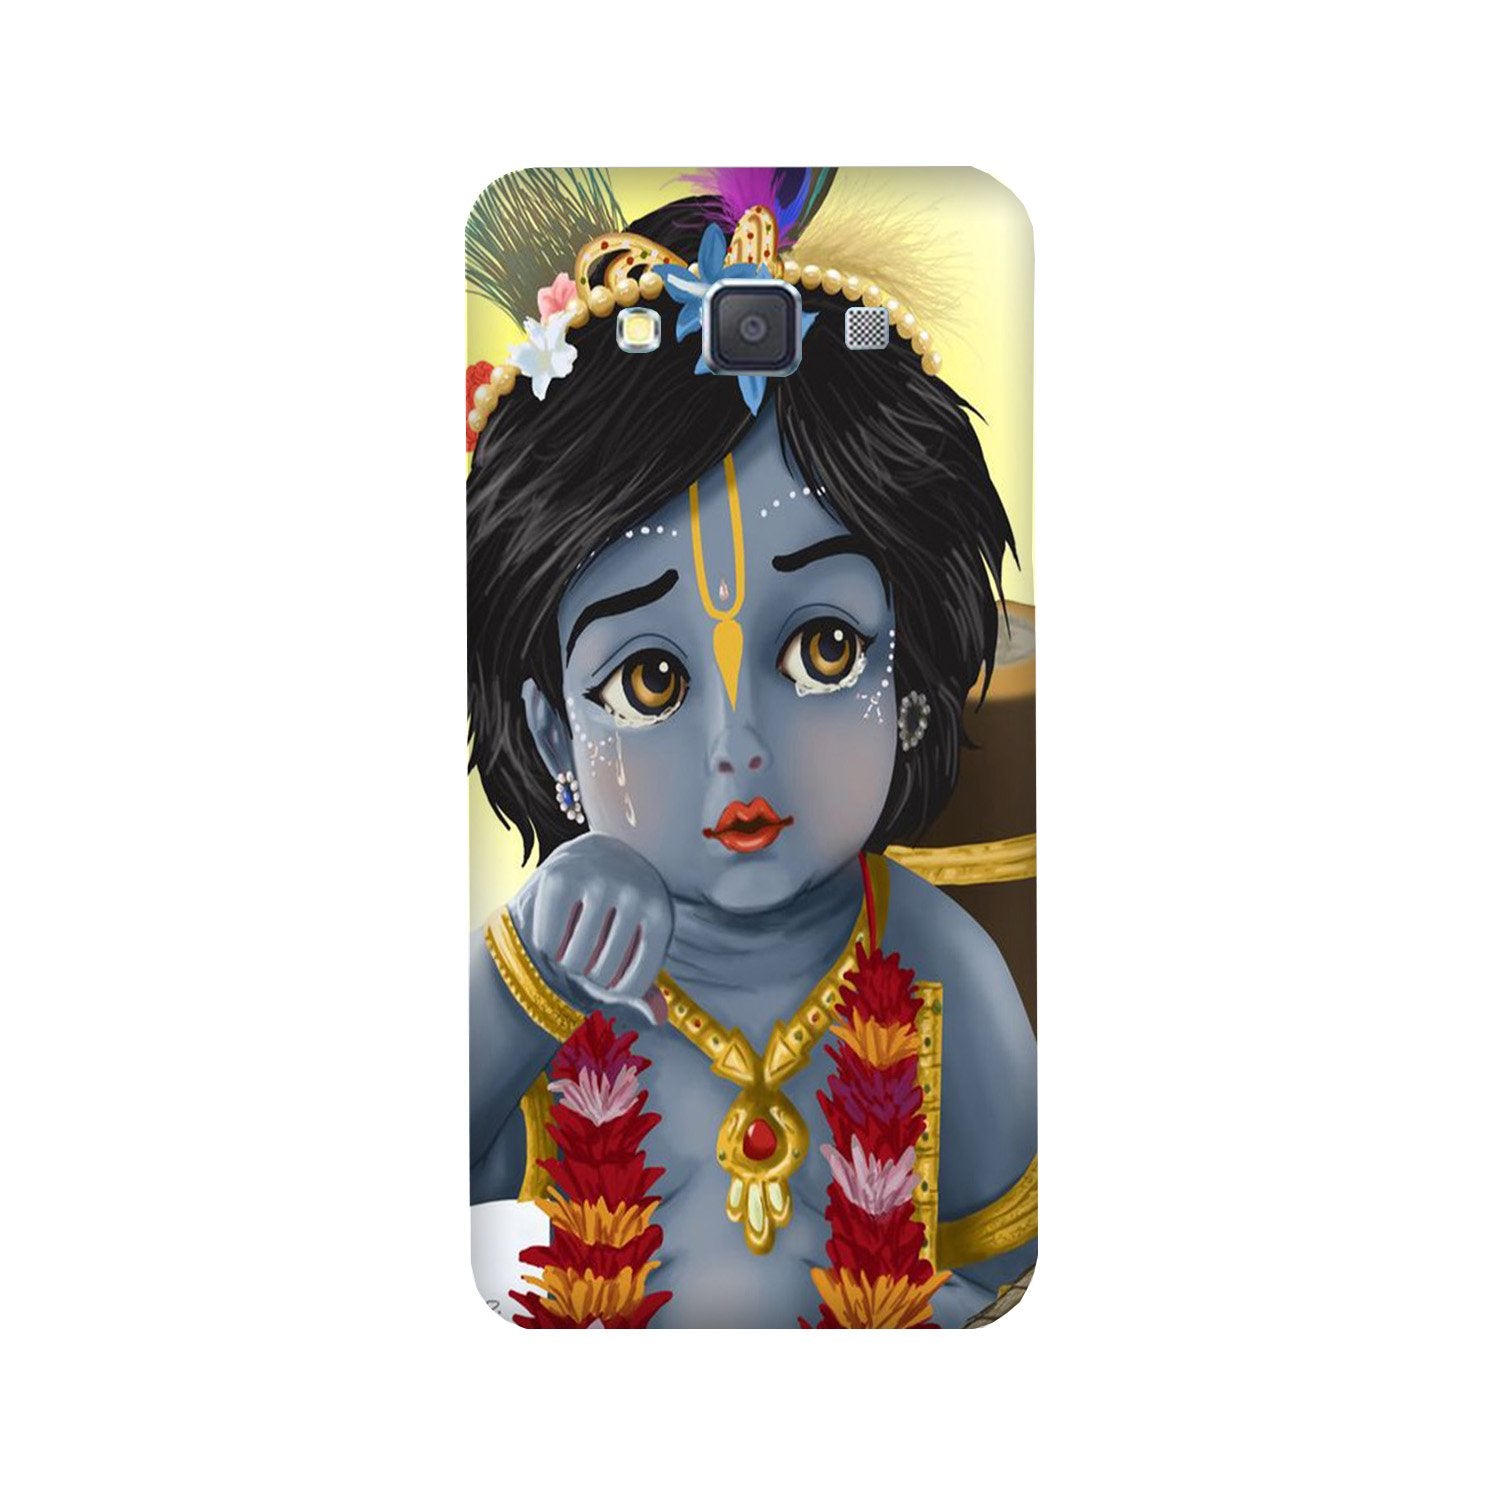 Bal Gopal Case for Galaxy ON7/ON7 Pro